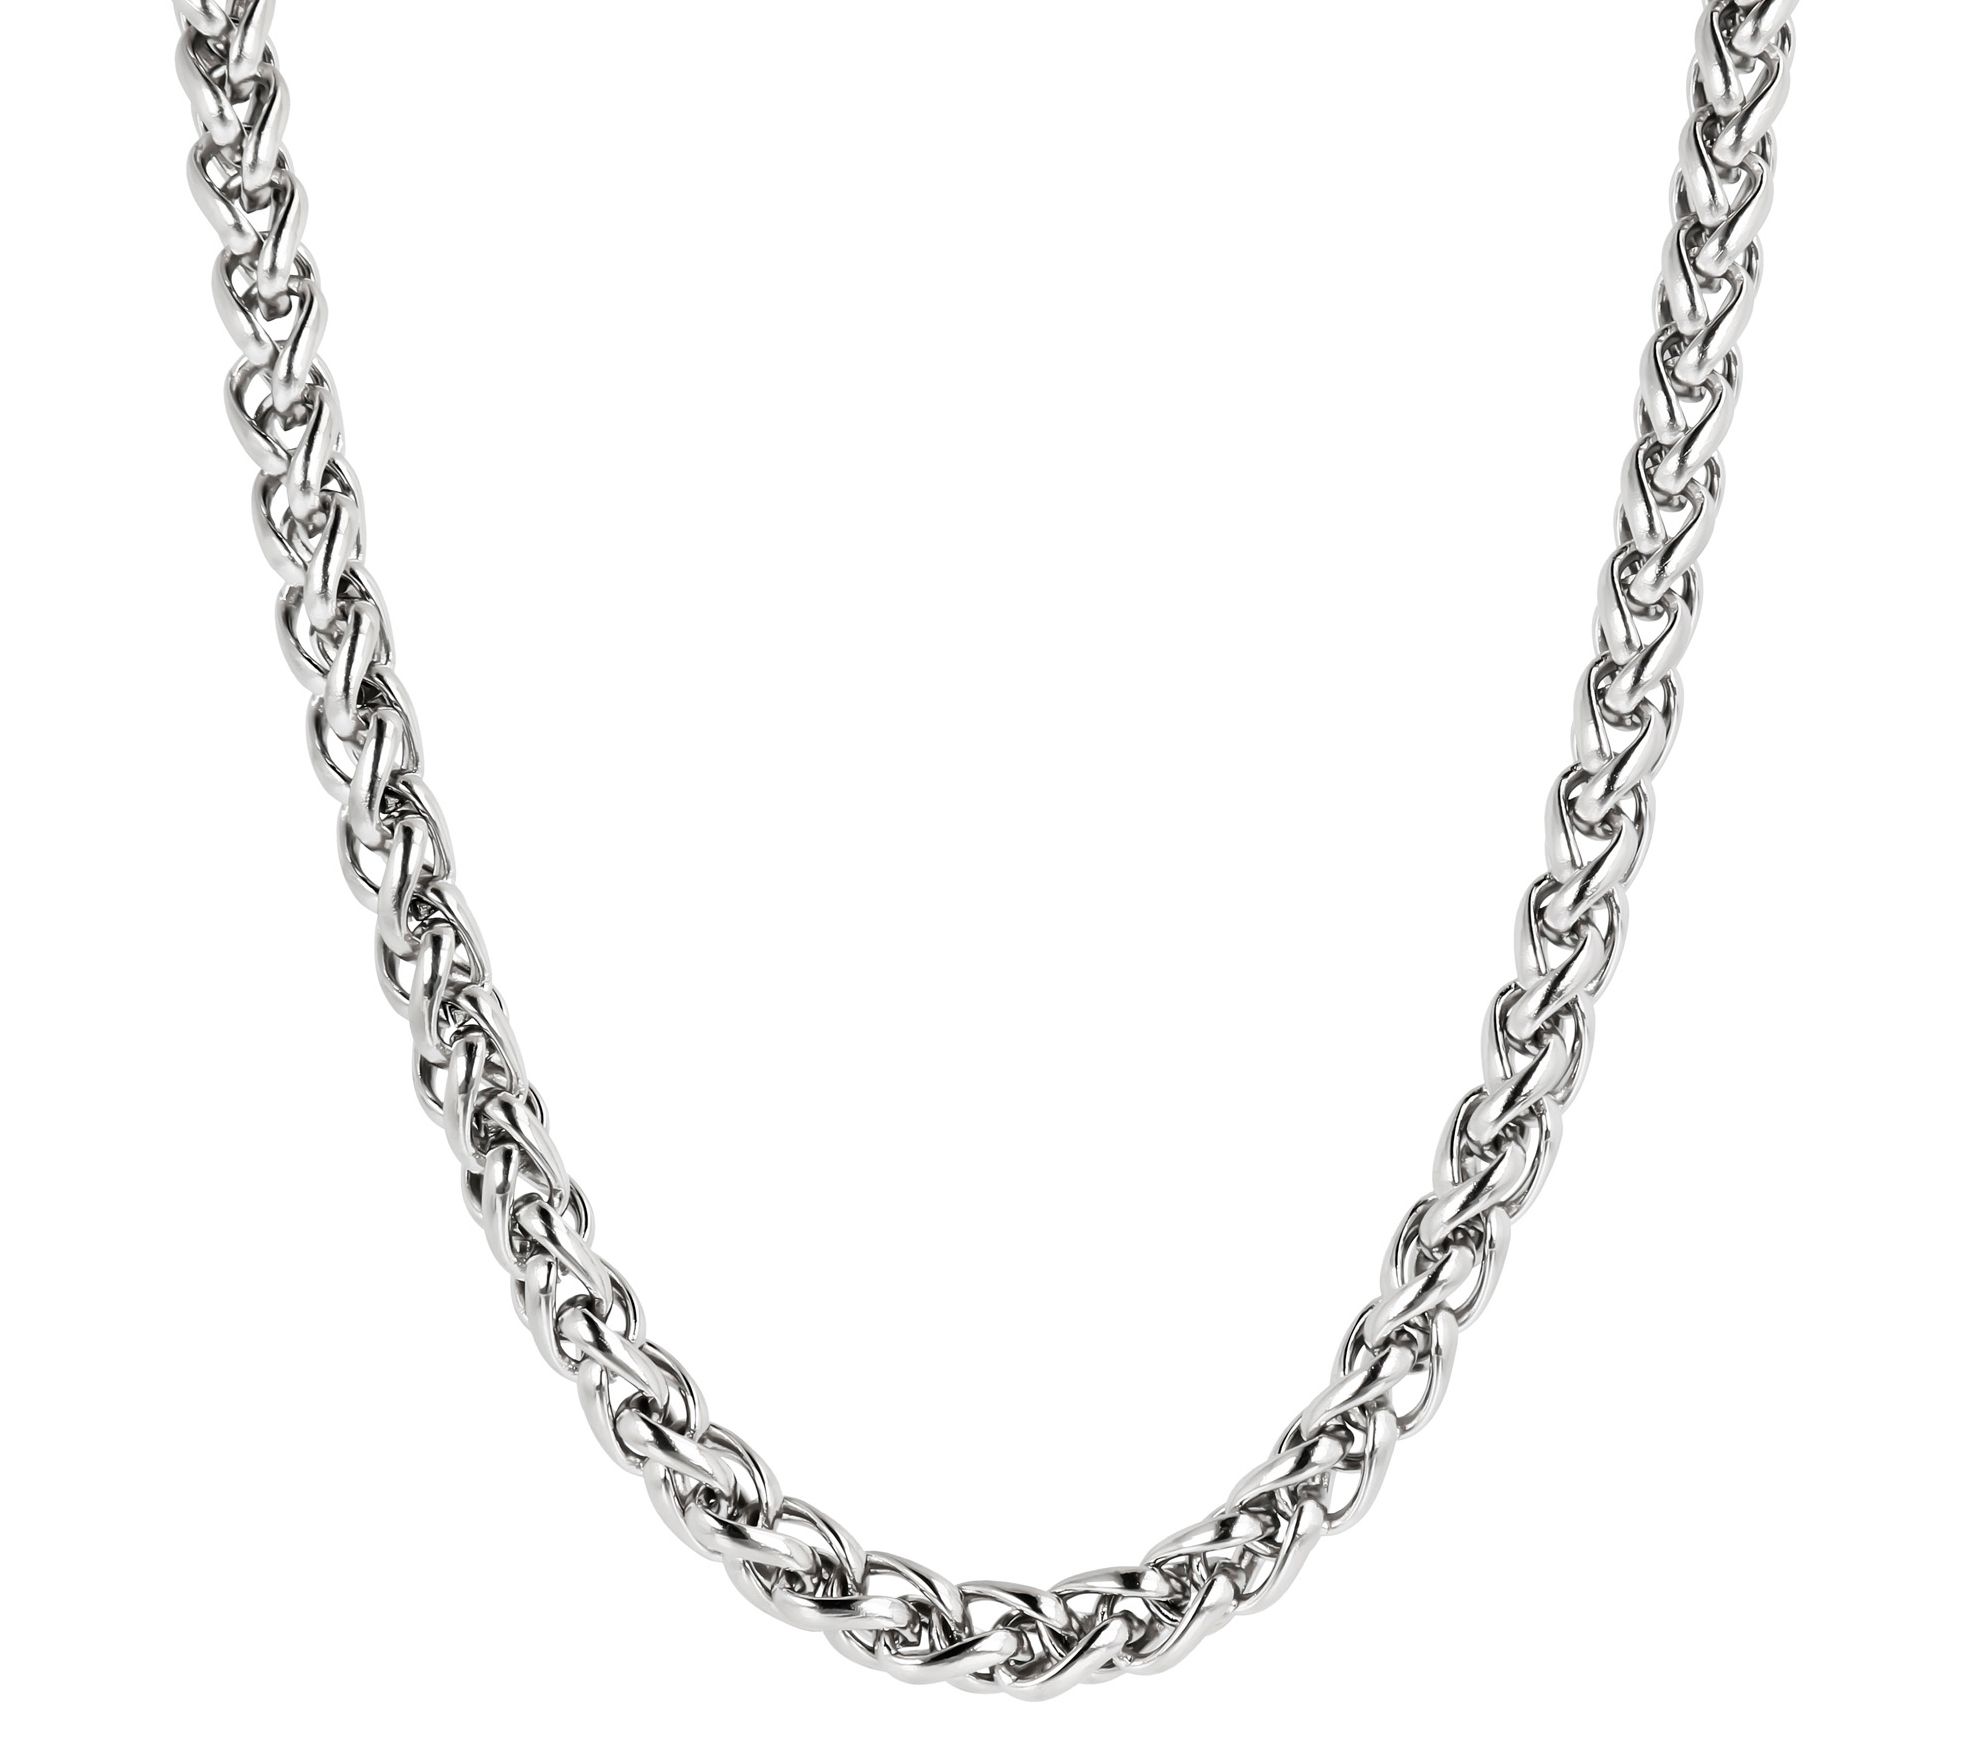 Steel by Design Polished Wheat Chain Necklace - QVC.com